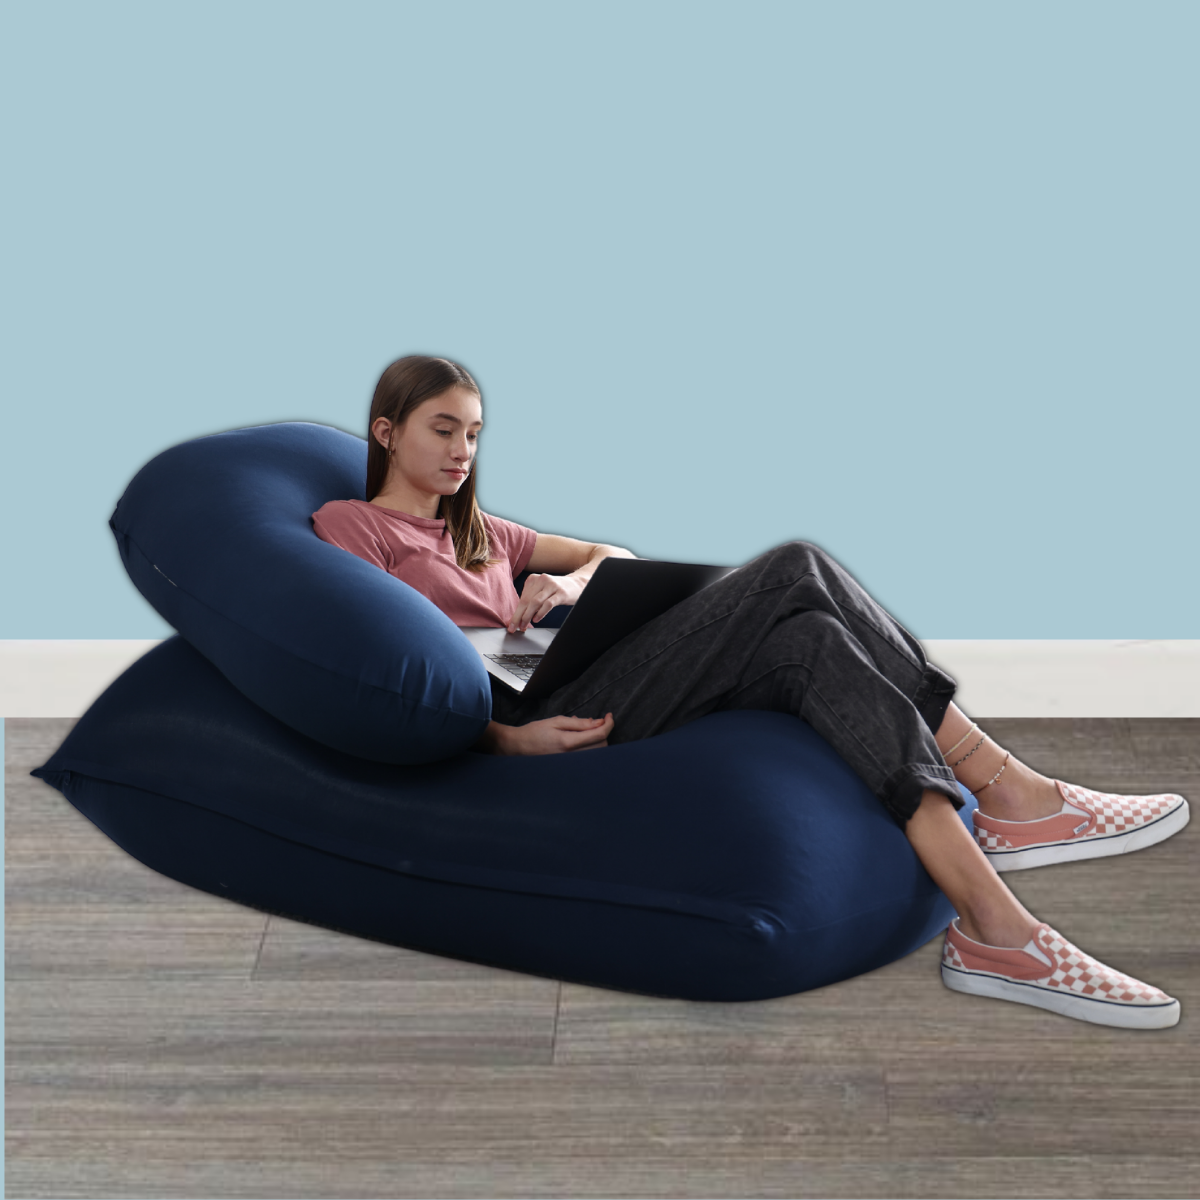 50% Off Luxi Living Beanbags and Support Pillows, from $95